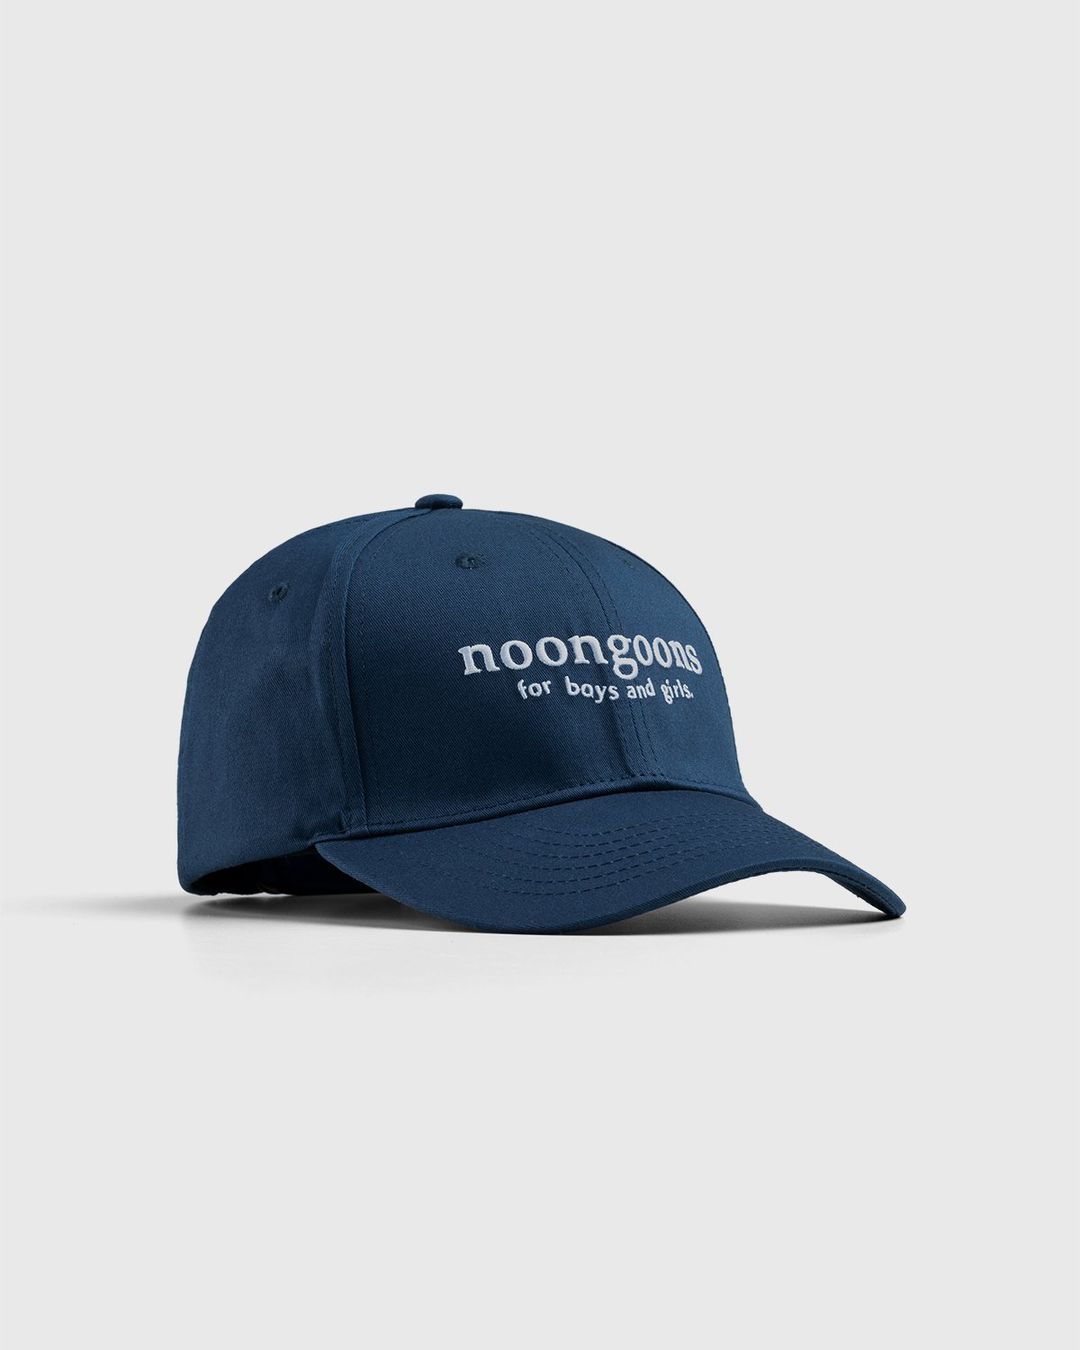 Noon Goons – Boys and Girls Hat Blue | Highsnobiety Shop